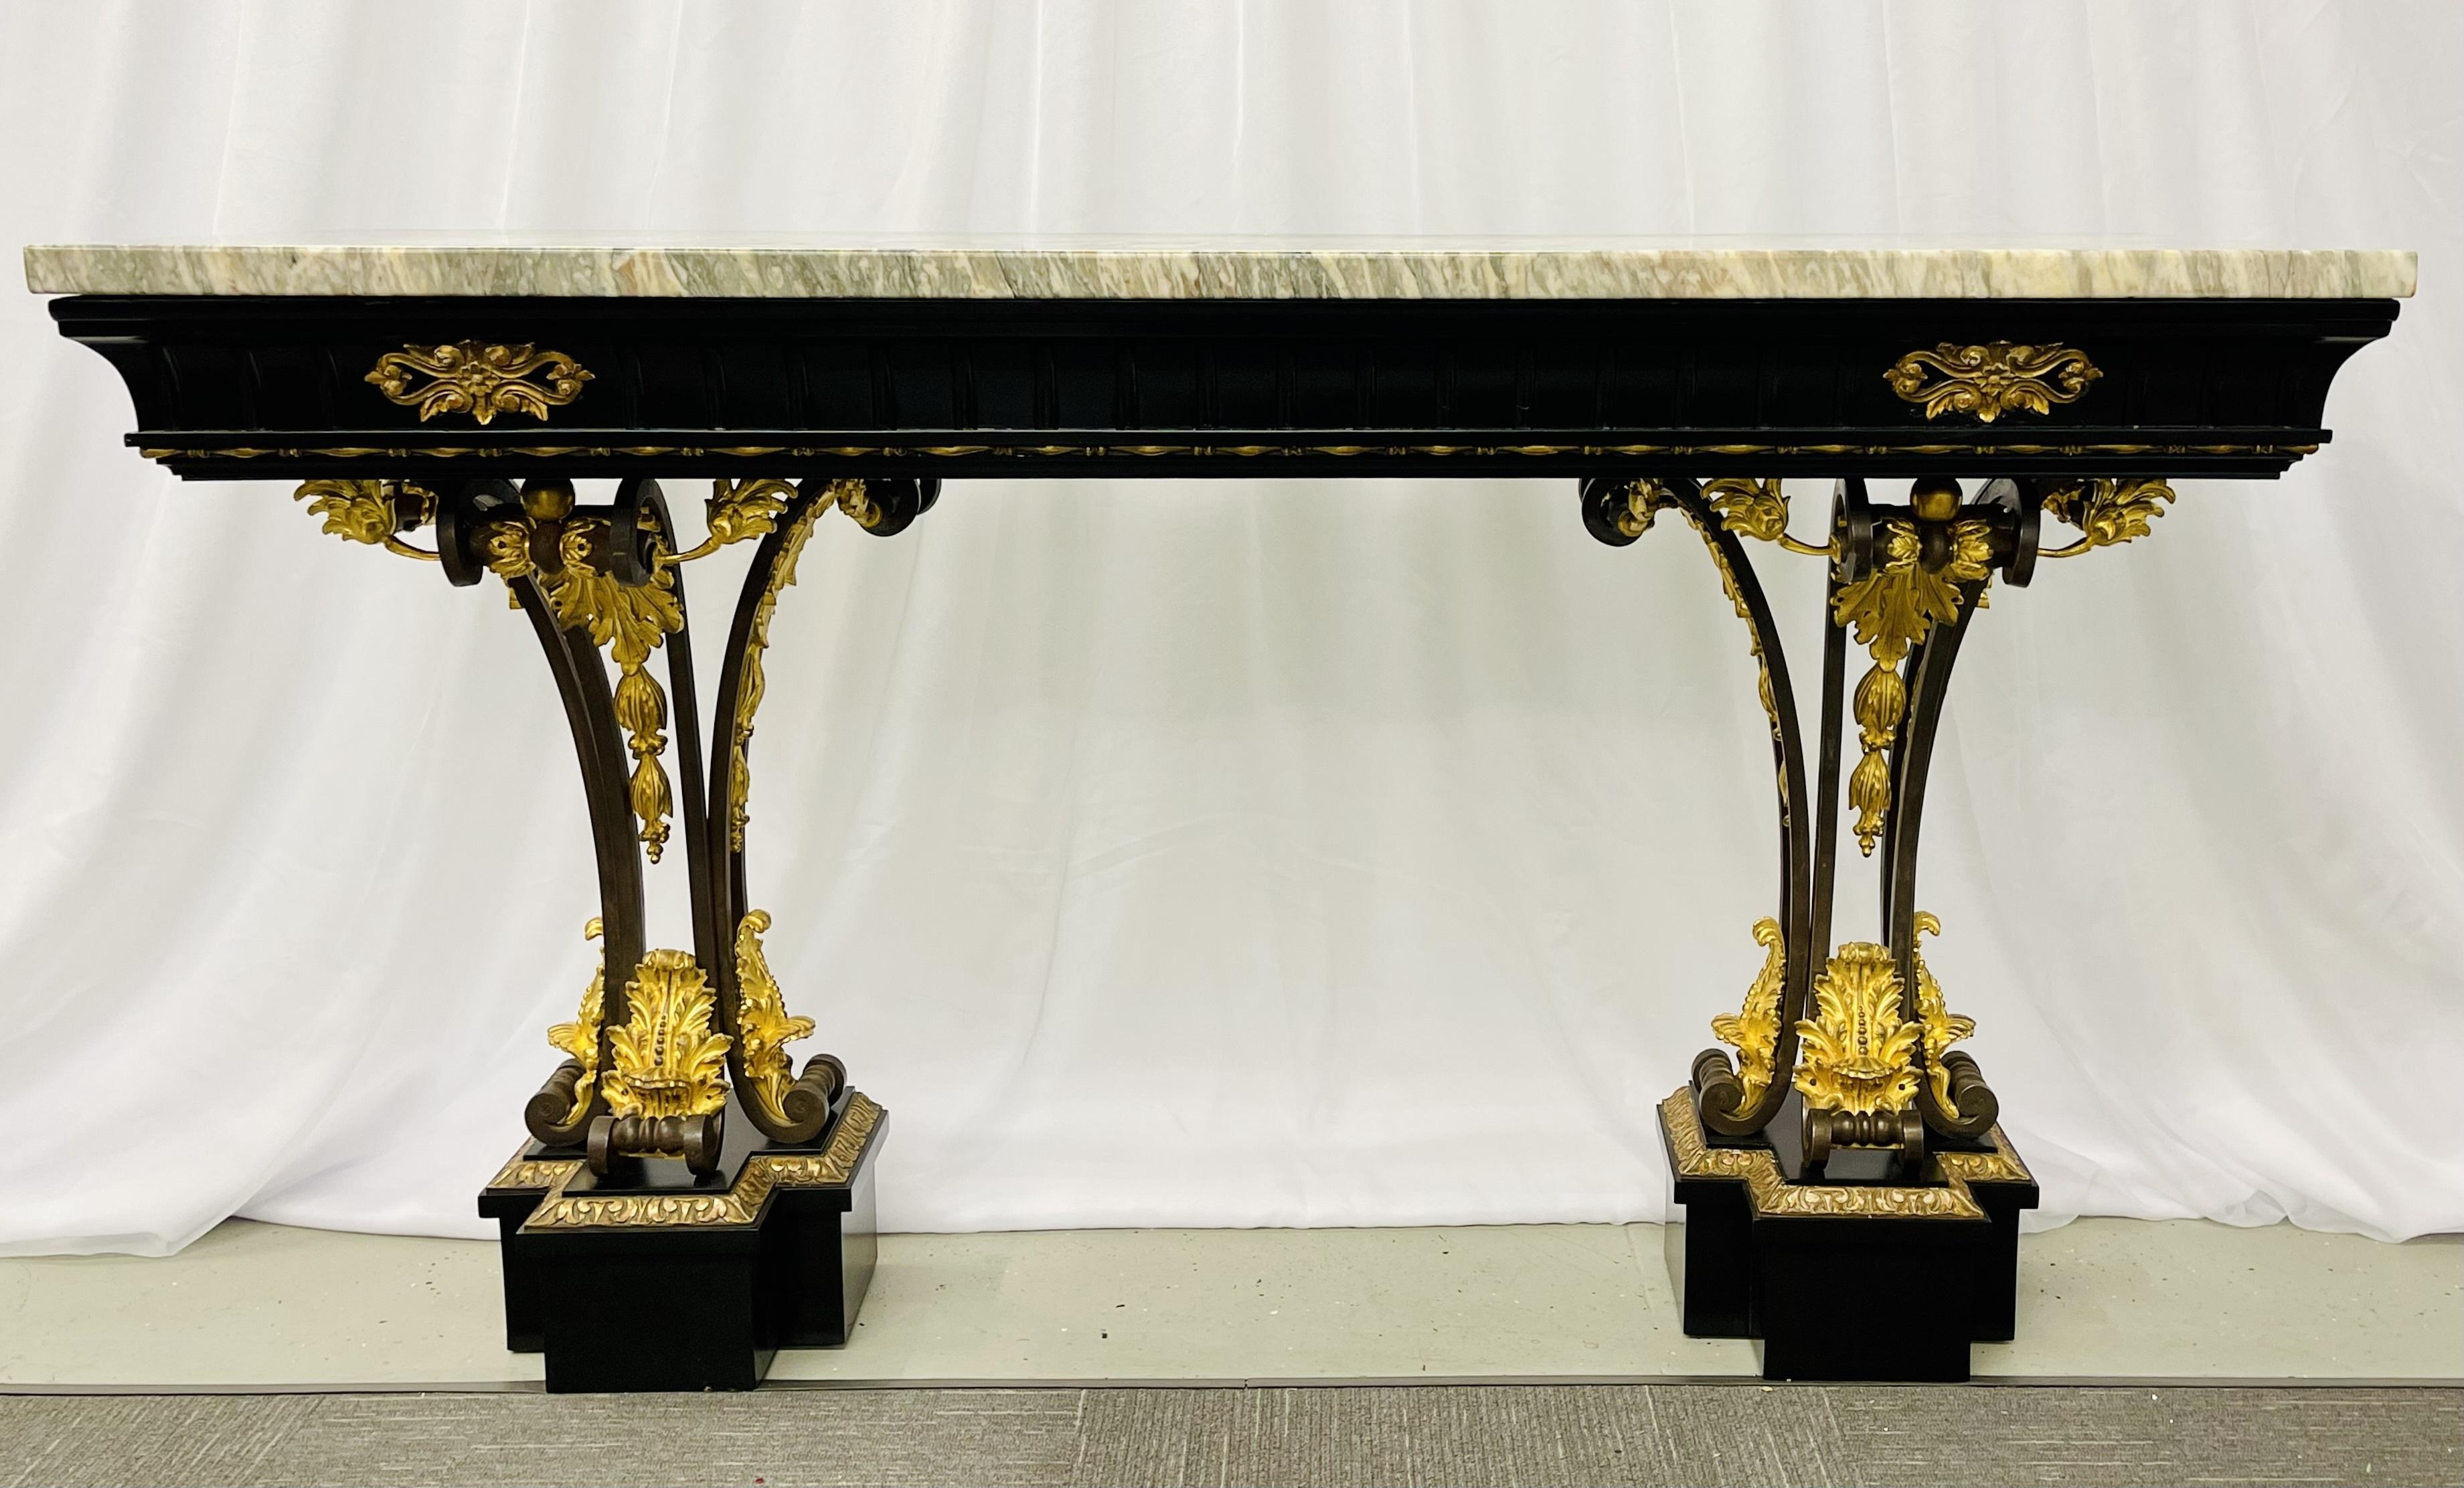 Neoclassical style console table, Refinished, bronze, Celebrity provenance
 
A walnut and parcel bronze and iron two-legged console table with a pink and gray marble top in the Neoclassical taste. Newly refnished in a gorgeous black satin finish